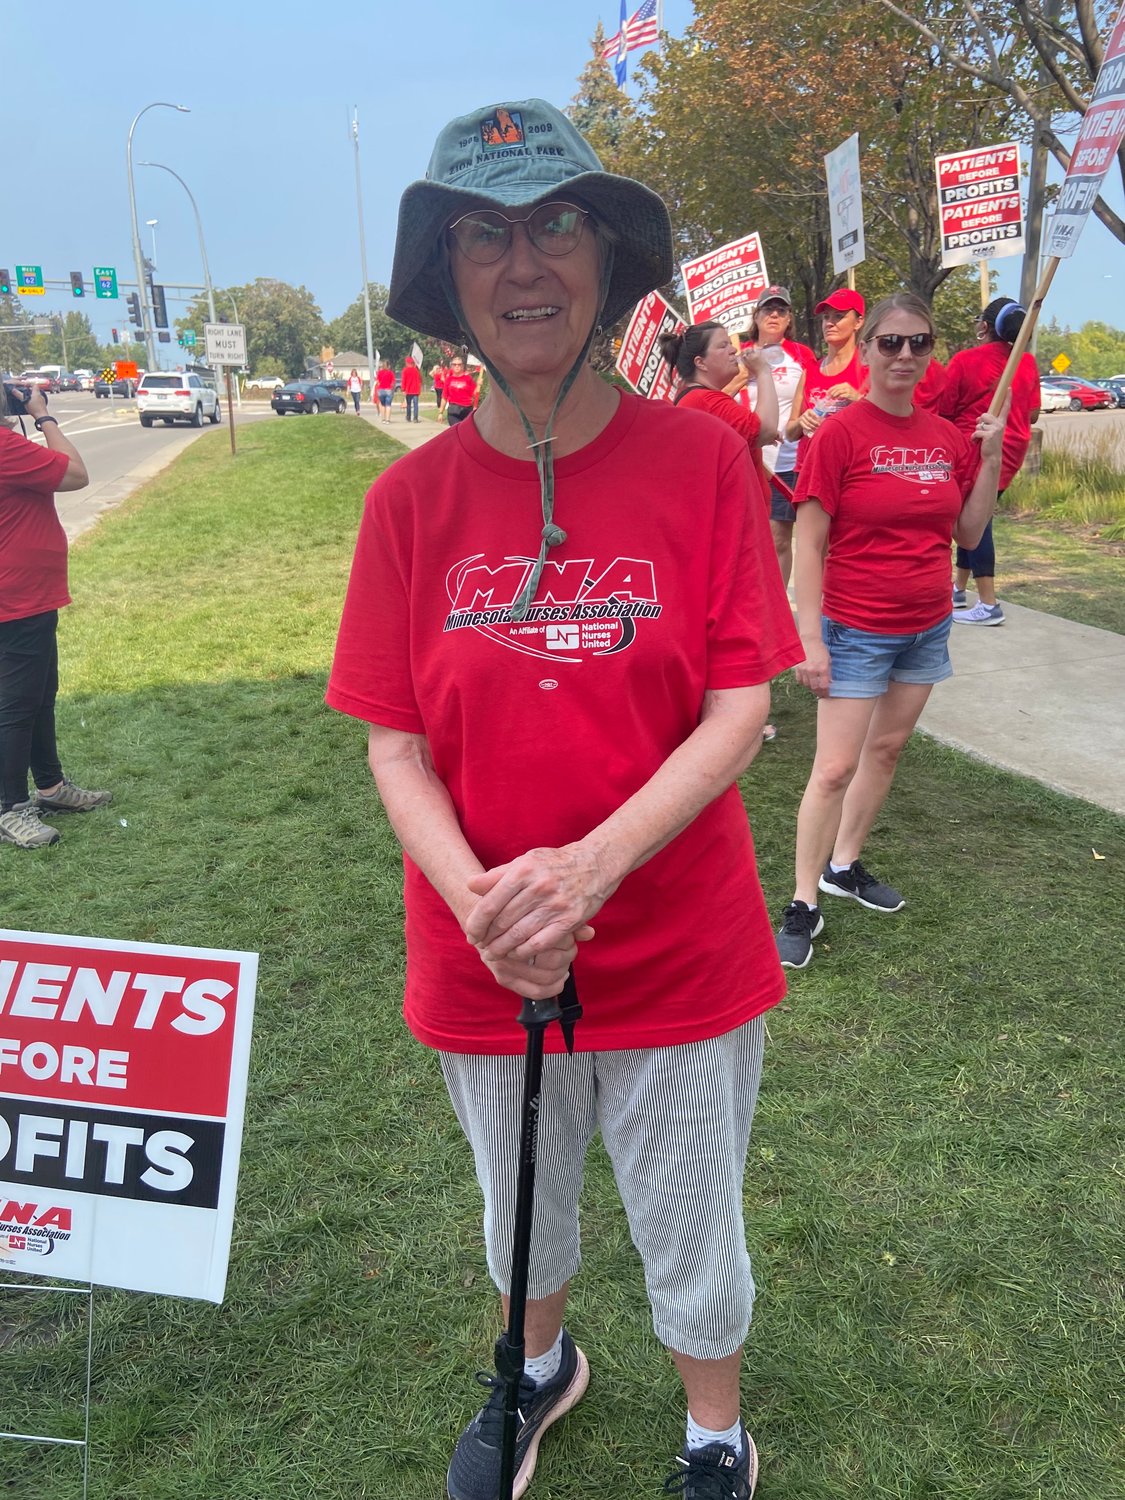 Karen Sandberg, a retired nurse since 2004, came back to stand in front of M Health Fairview Hospital Southdale ,at 6401 France Ave S, Edina, on Sept. 14th, 2022 to strike with current nurses.